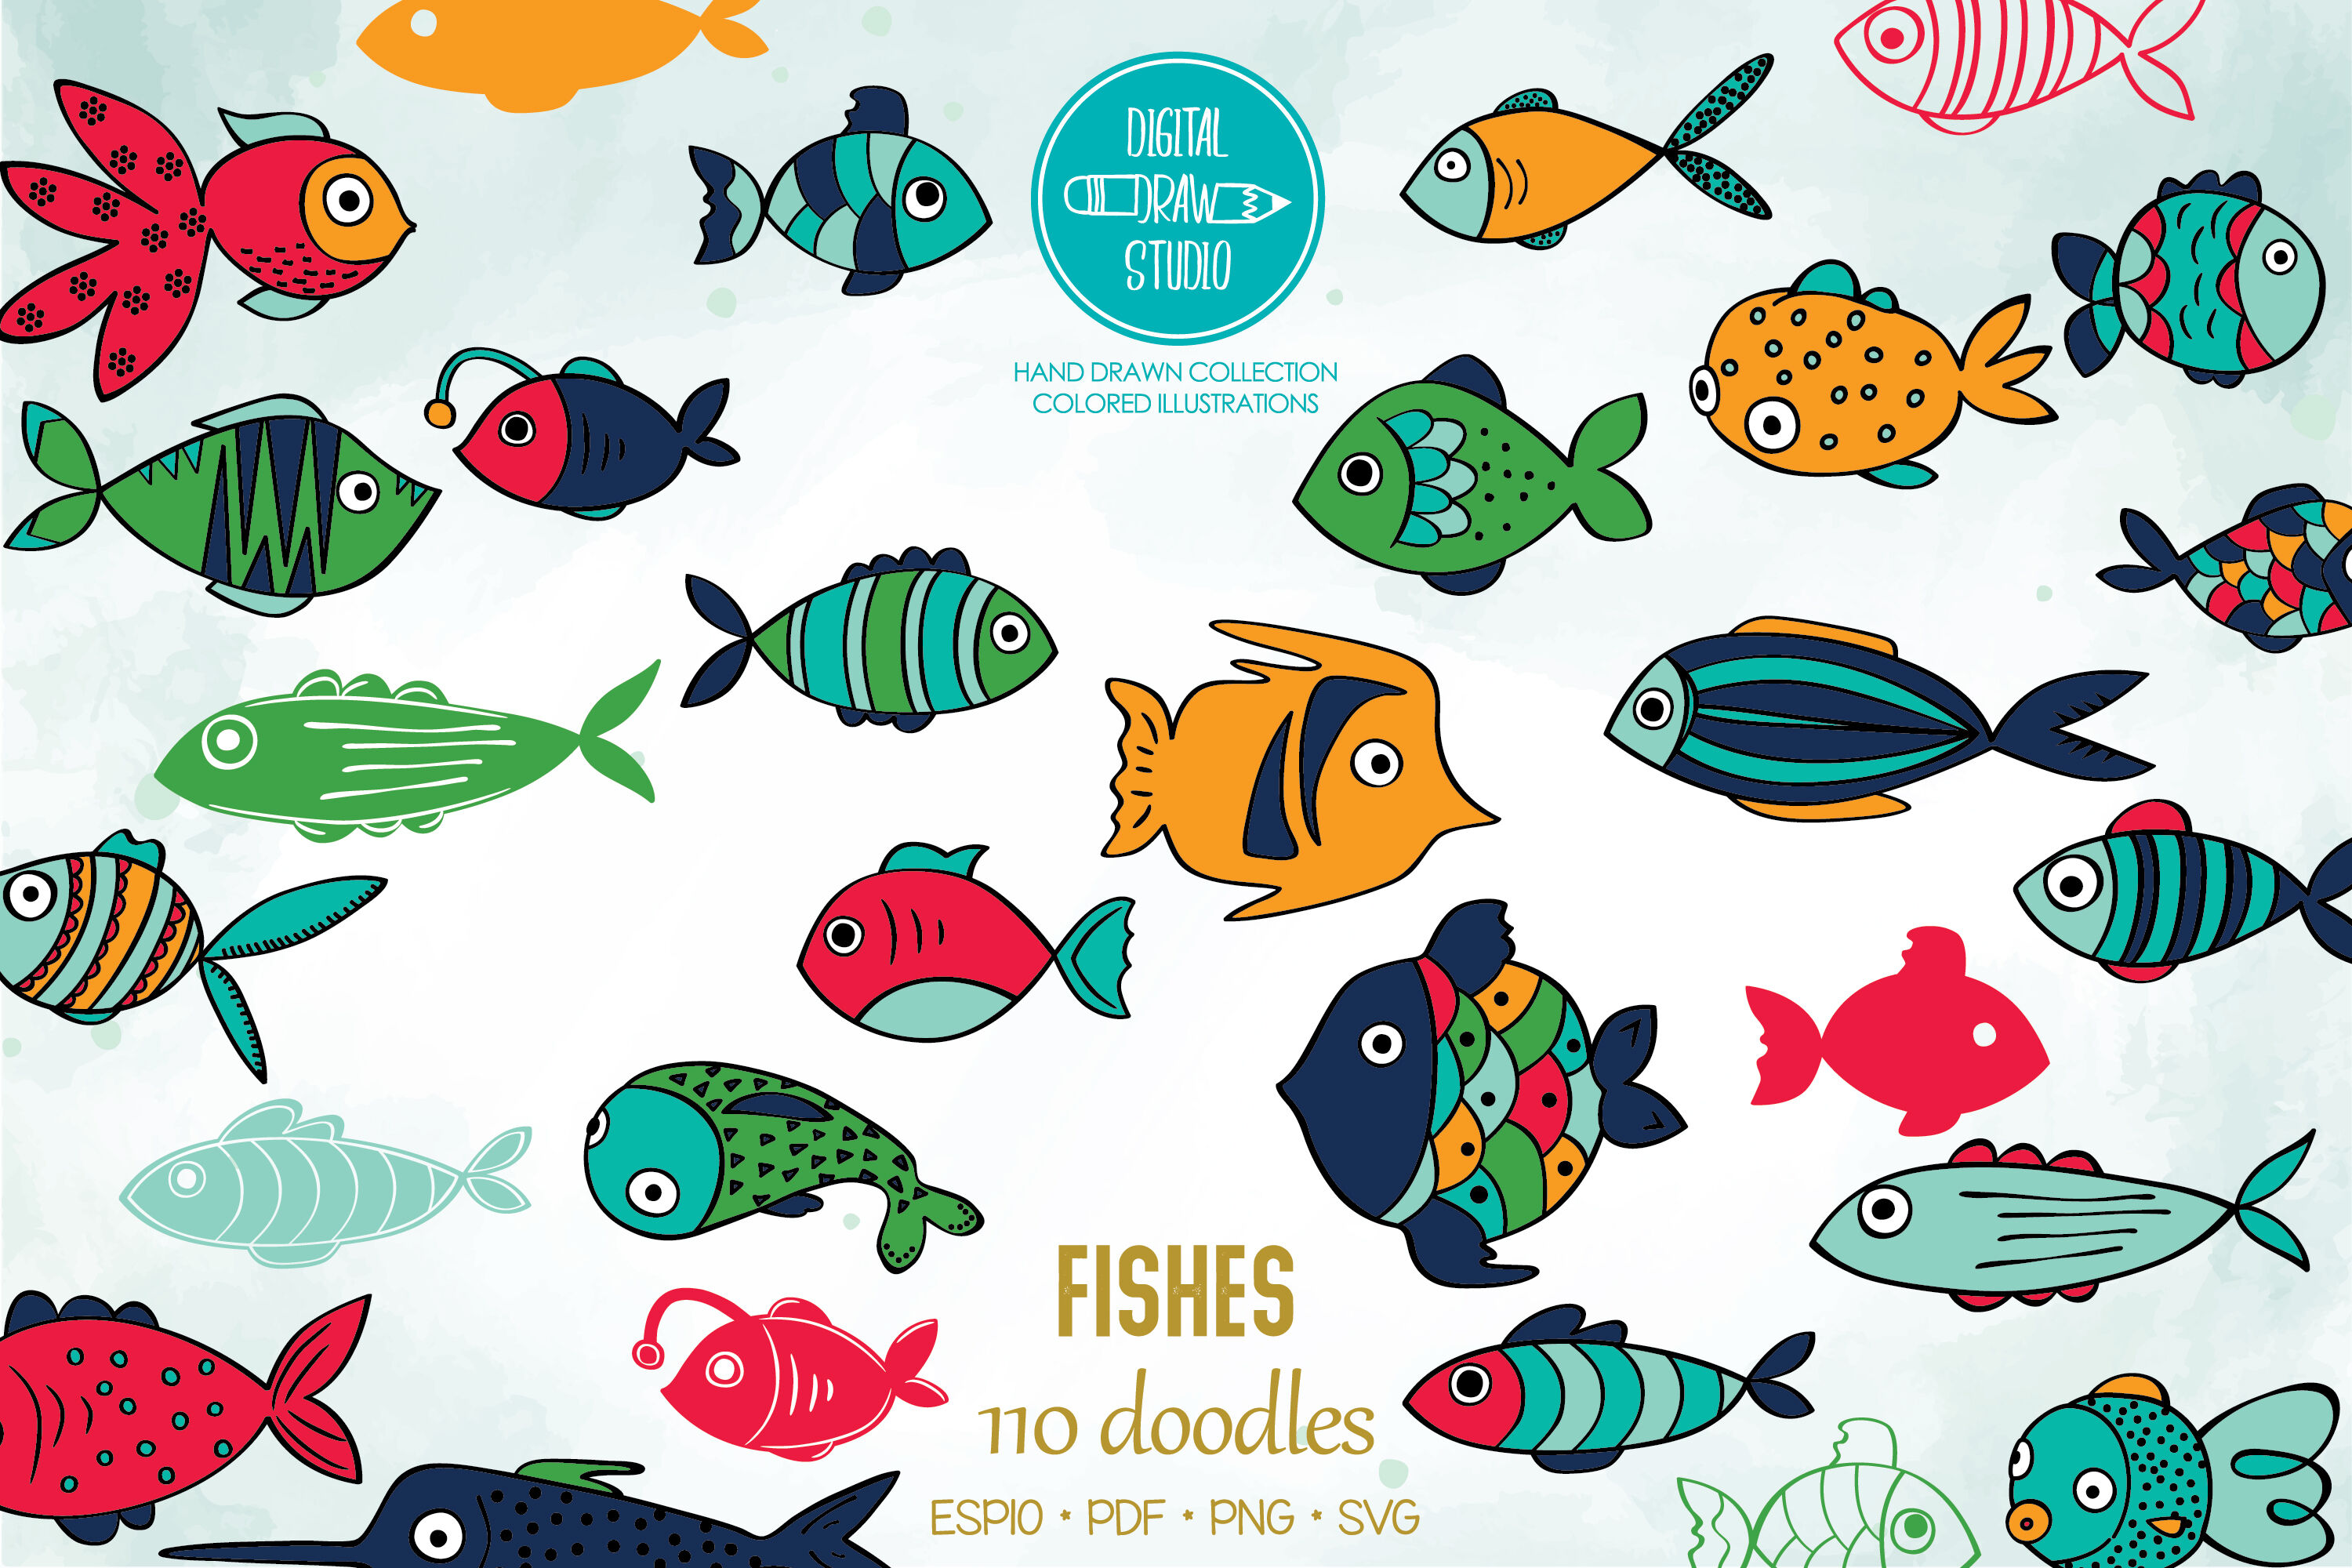 Hand Drawn Colored Fish, Cute Tropical Fishes, Under the Sea By Digital  Draw Studio